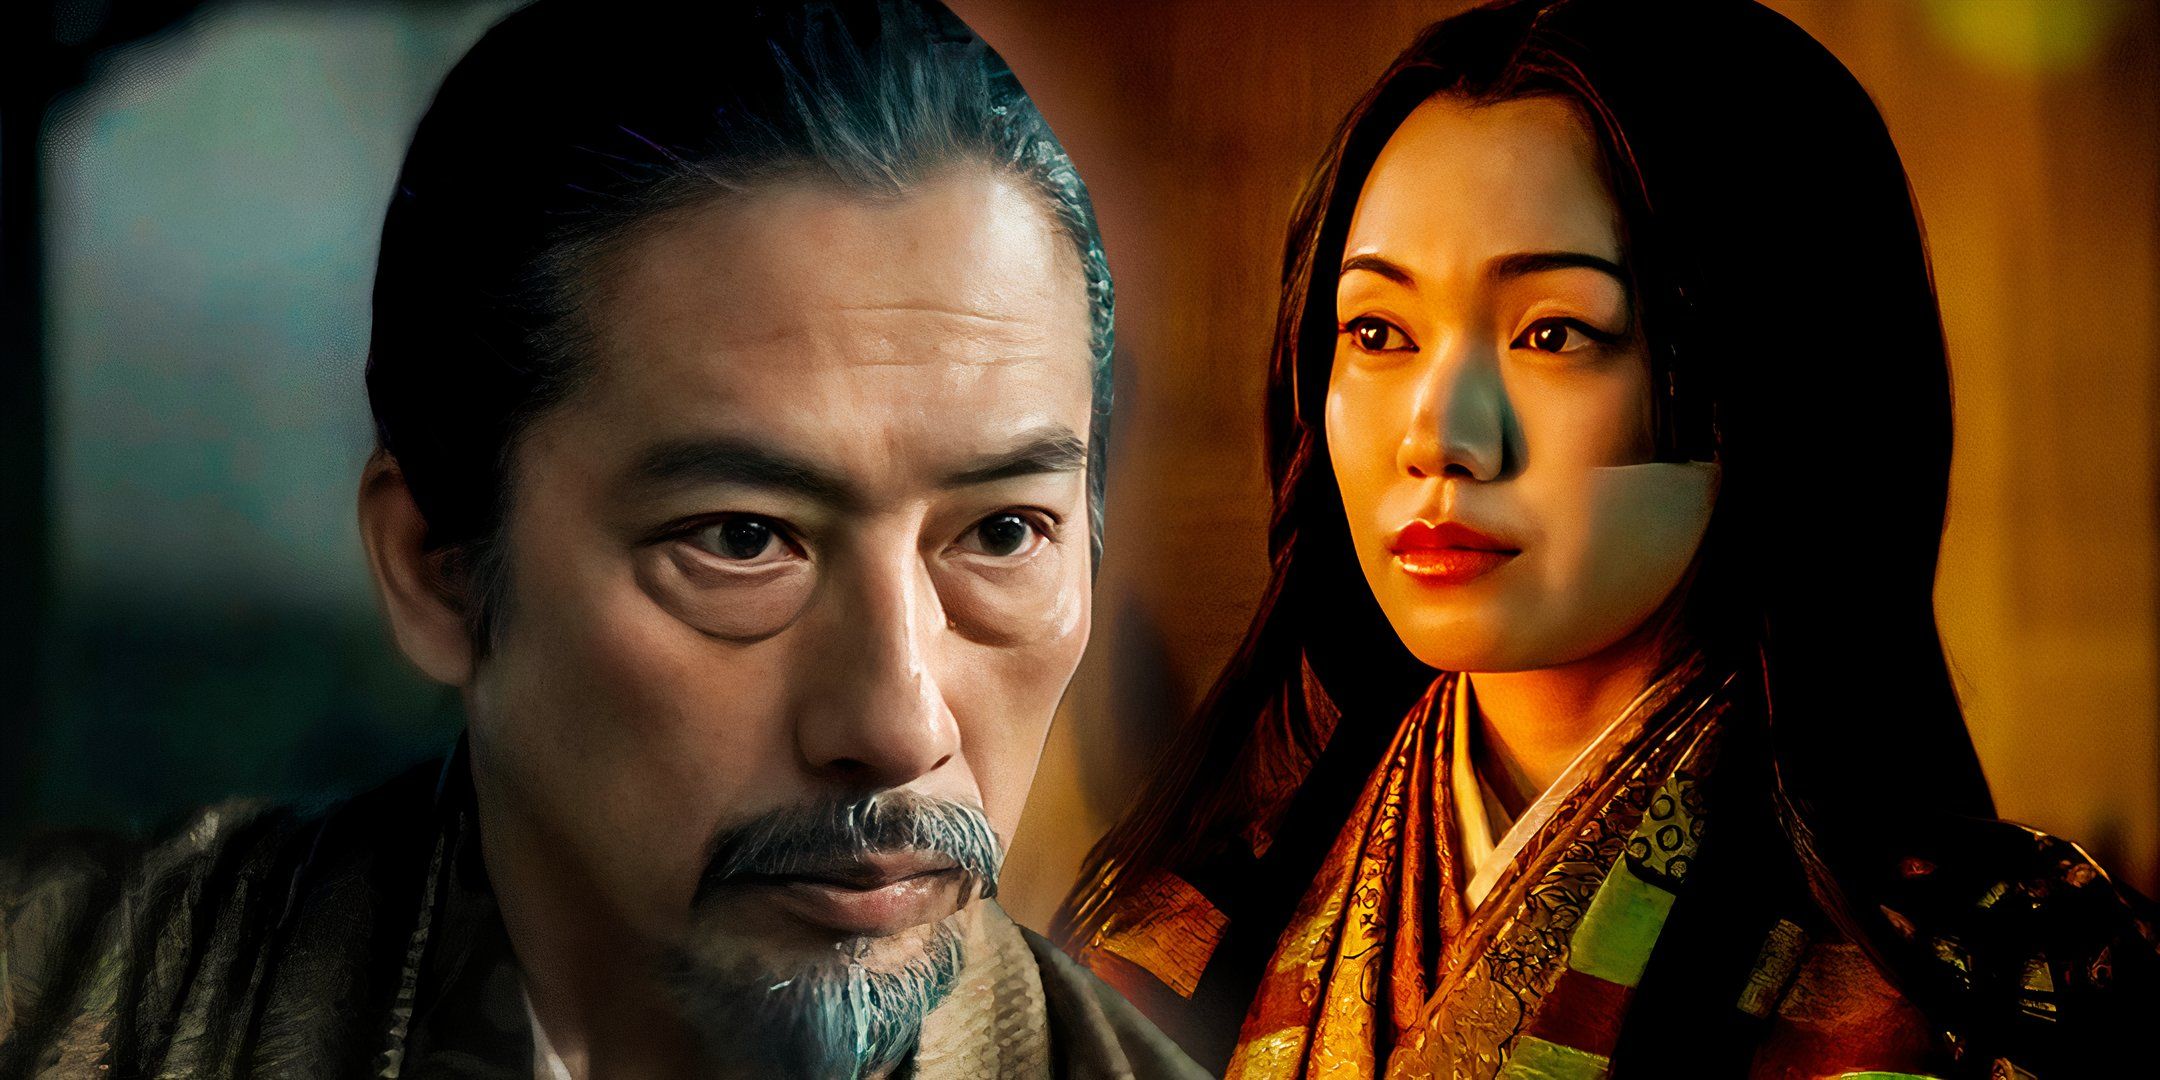 Who Can Return In Shogun Season 2? 8 Characters We Think Will Be Back